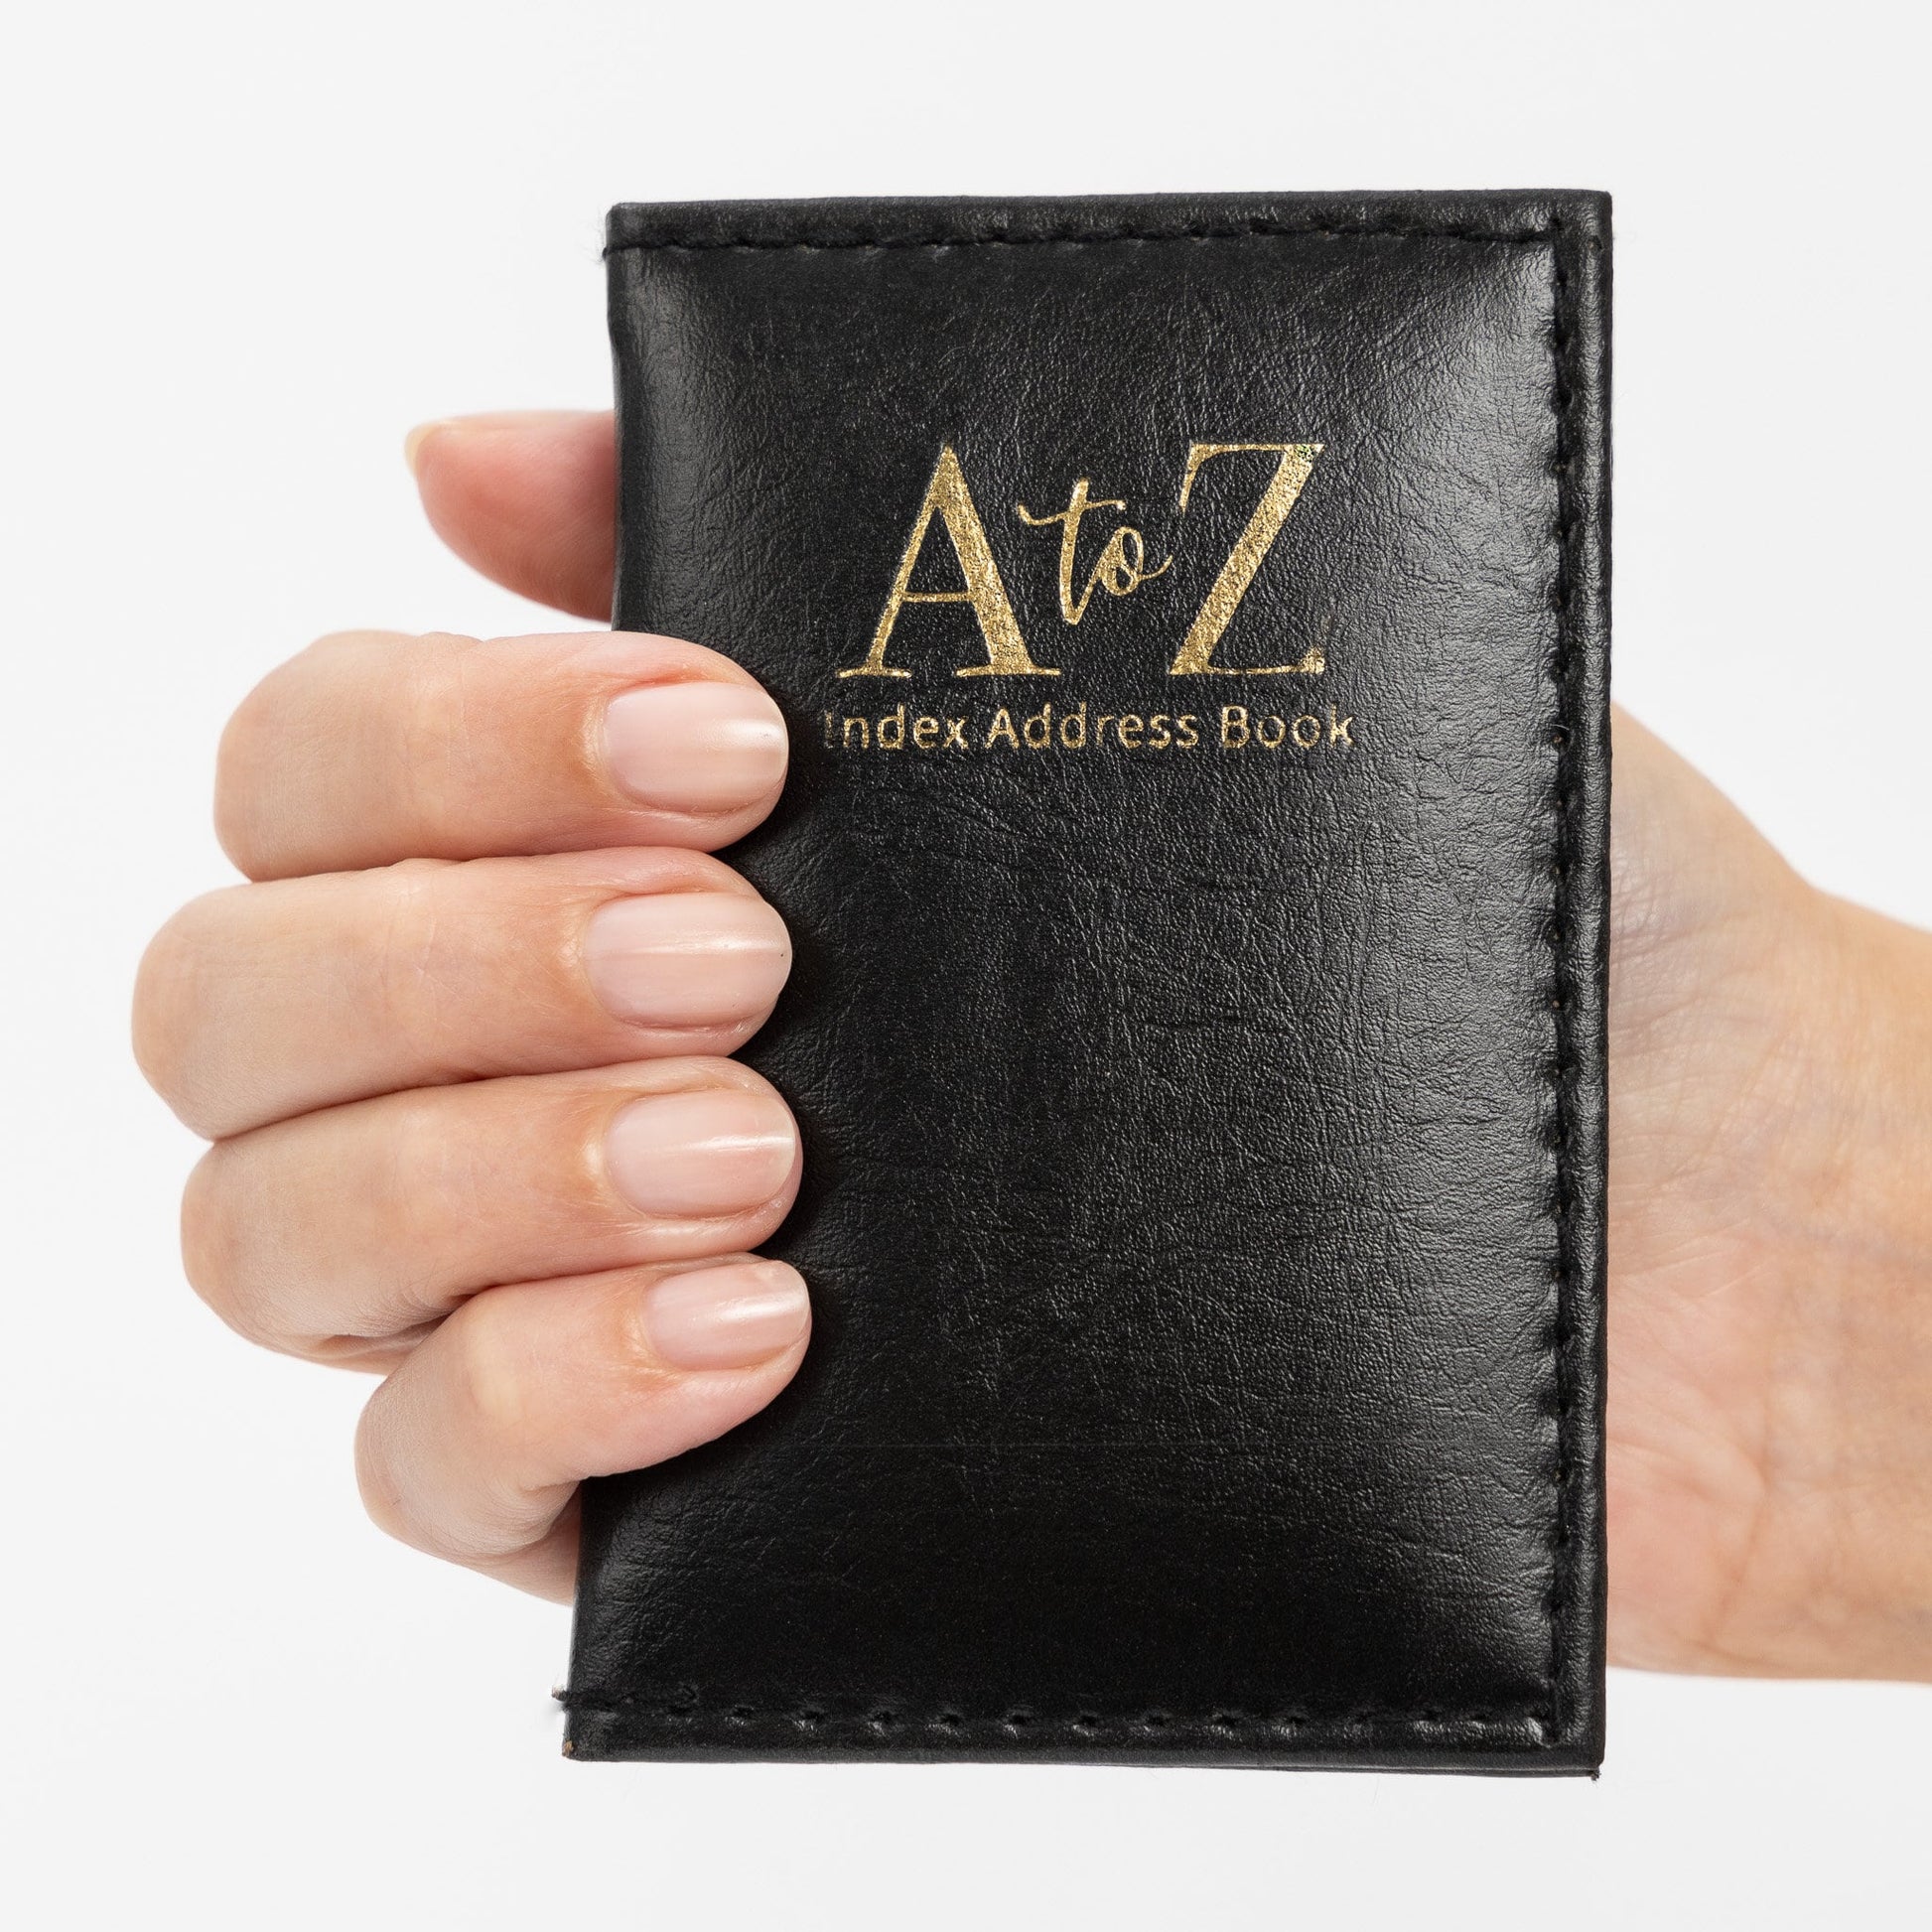 Index Address Book Leather Look Cover Executive Padded Small Sizes Notebook A-Z (Black) Keechi & co.